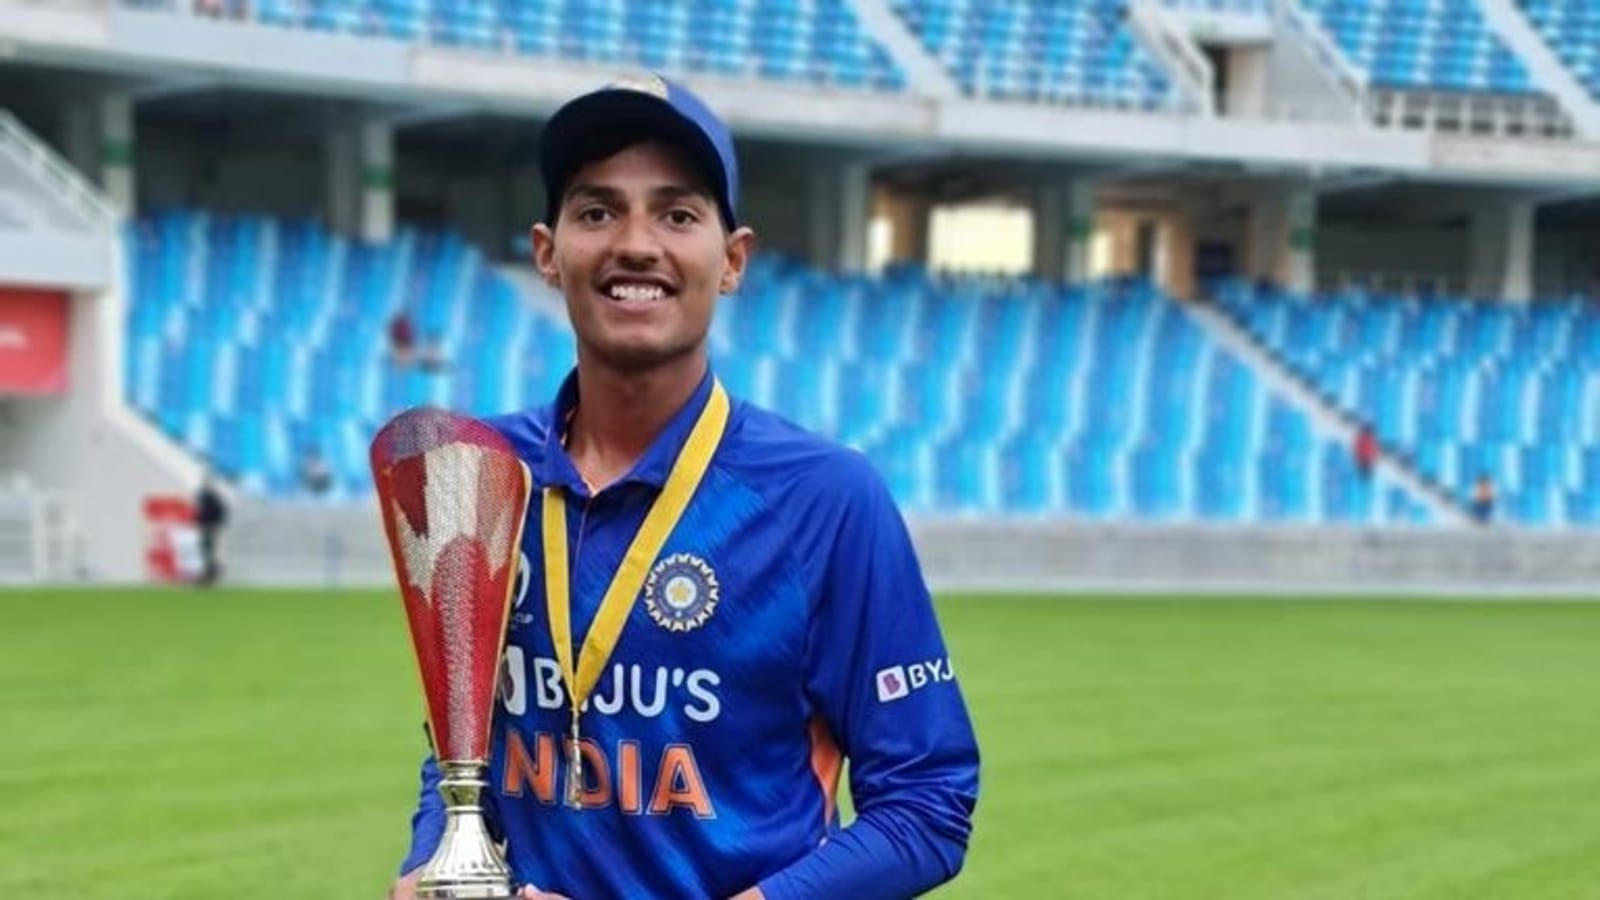 Ranji Trophy 2022 Live: Another Kohli in making? India’s U19 World Cup-winning captain Yash Dhull smashes CENTURY on First Class debut